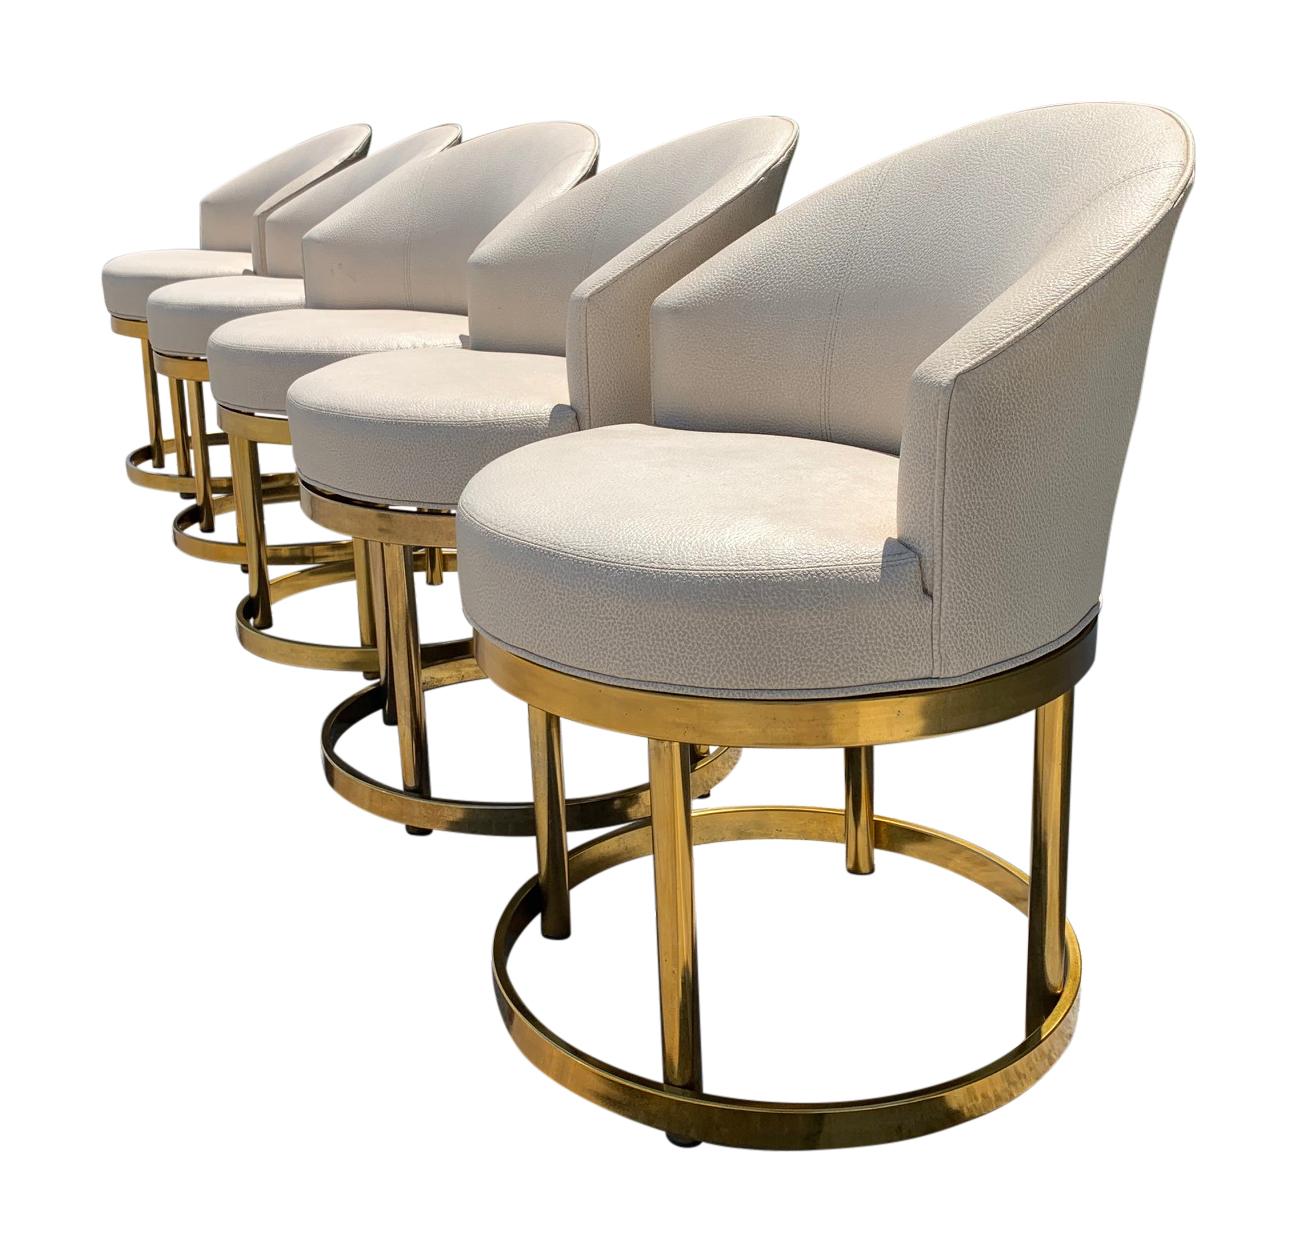 Swivel stools on brass bases in the manner of Milo Baughman, Mid-Century Modern.